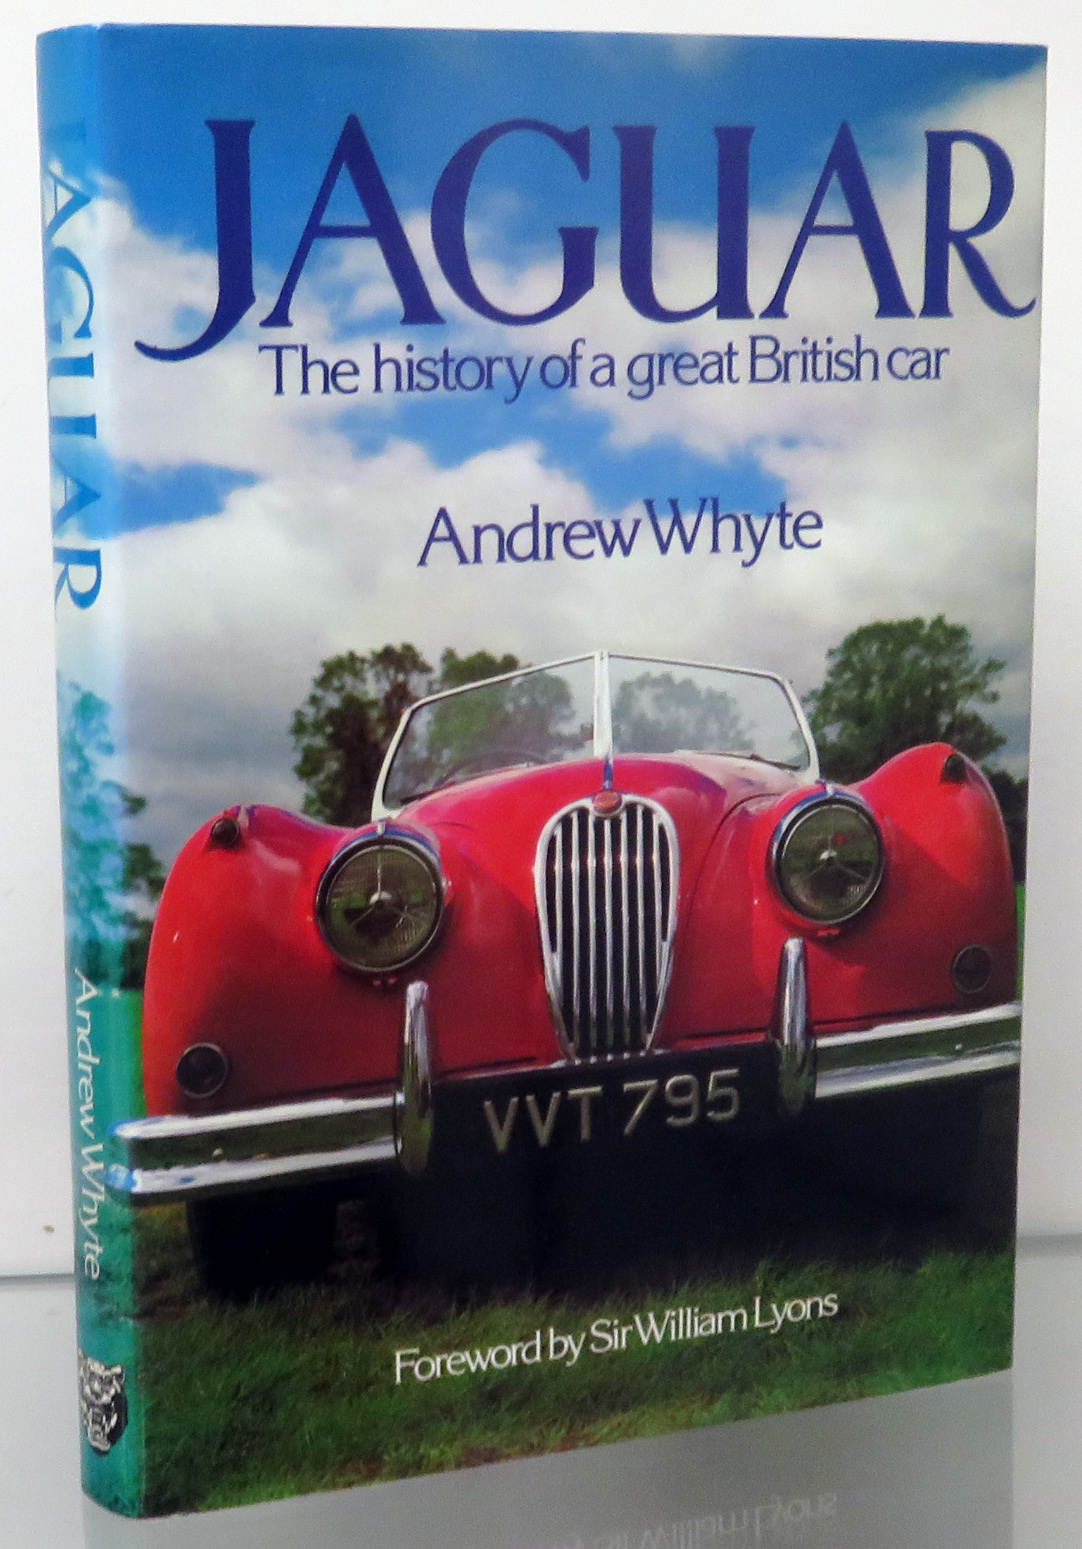 Jaguar The History of a great British car - Andrew Whyte